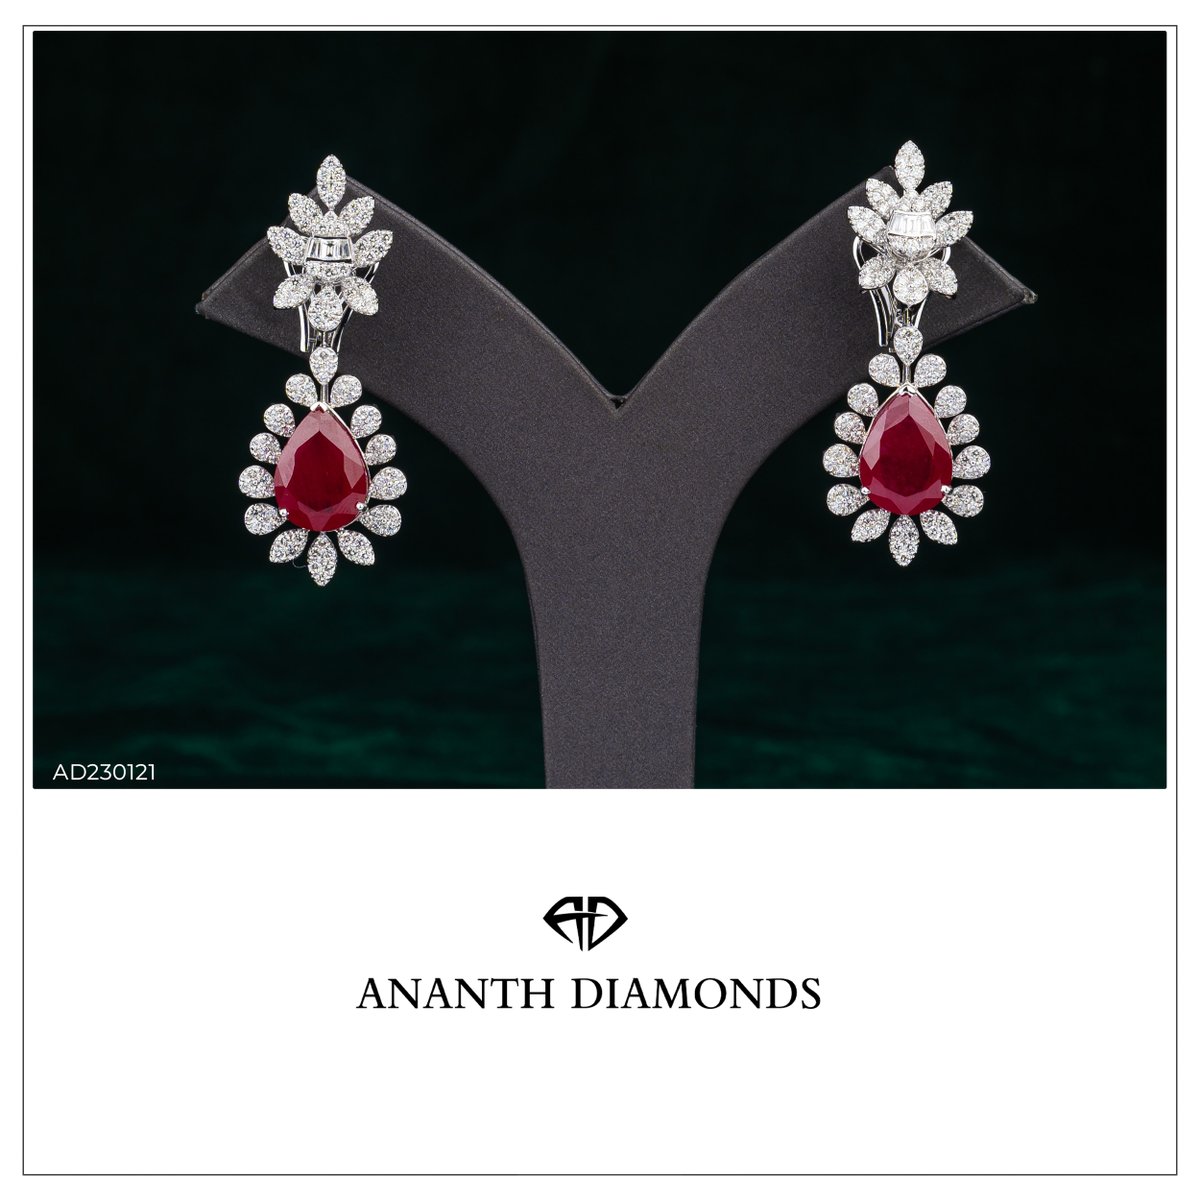 Elevate your everyday style with a touch of diamond luxury.
.
.
Video Call Shopping Available! +91-9114112233 - Shopping made easier with Ananth Diamonds.
.
#diamondropearrings #earrings #diamondearrings #traditionalearrings #jewllerydesigns #bridaljewellery  #happyclients